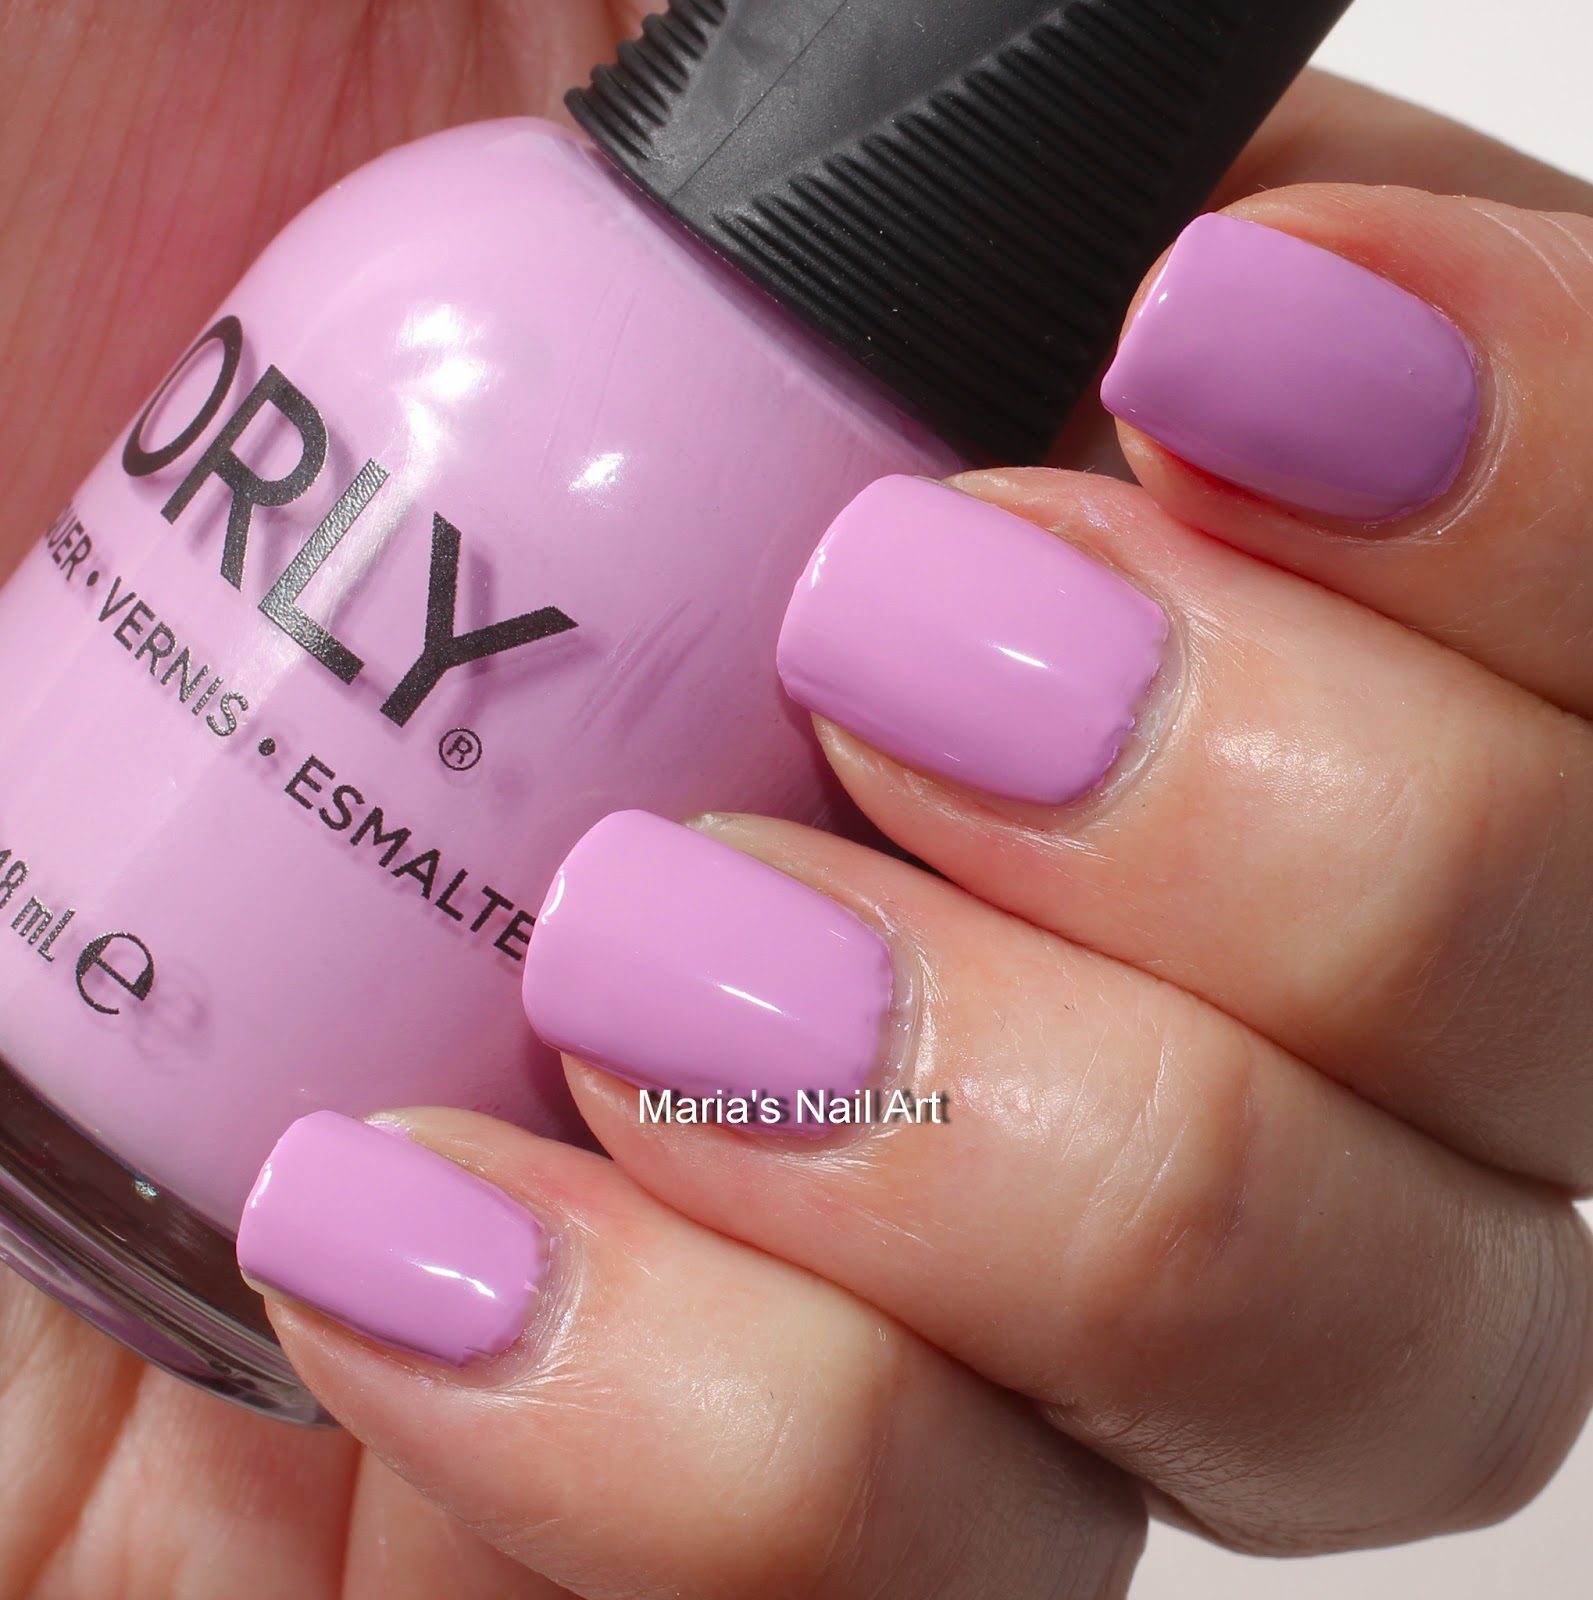 Marias Nail Art and Polish Blog: Orly Sweet coll. swatches: Snowcone ...